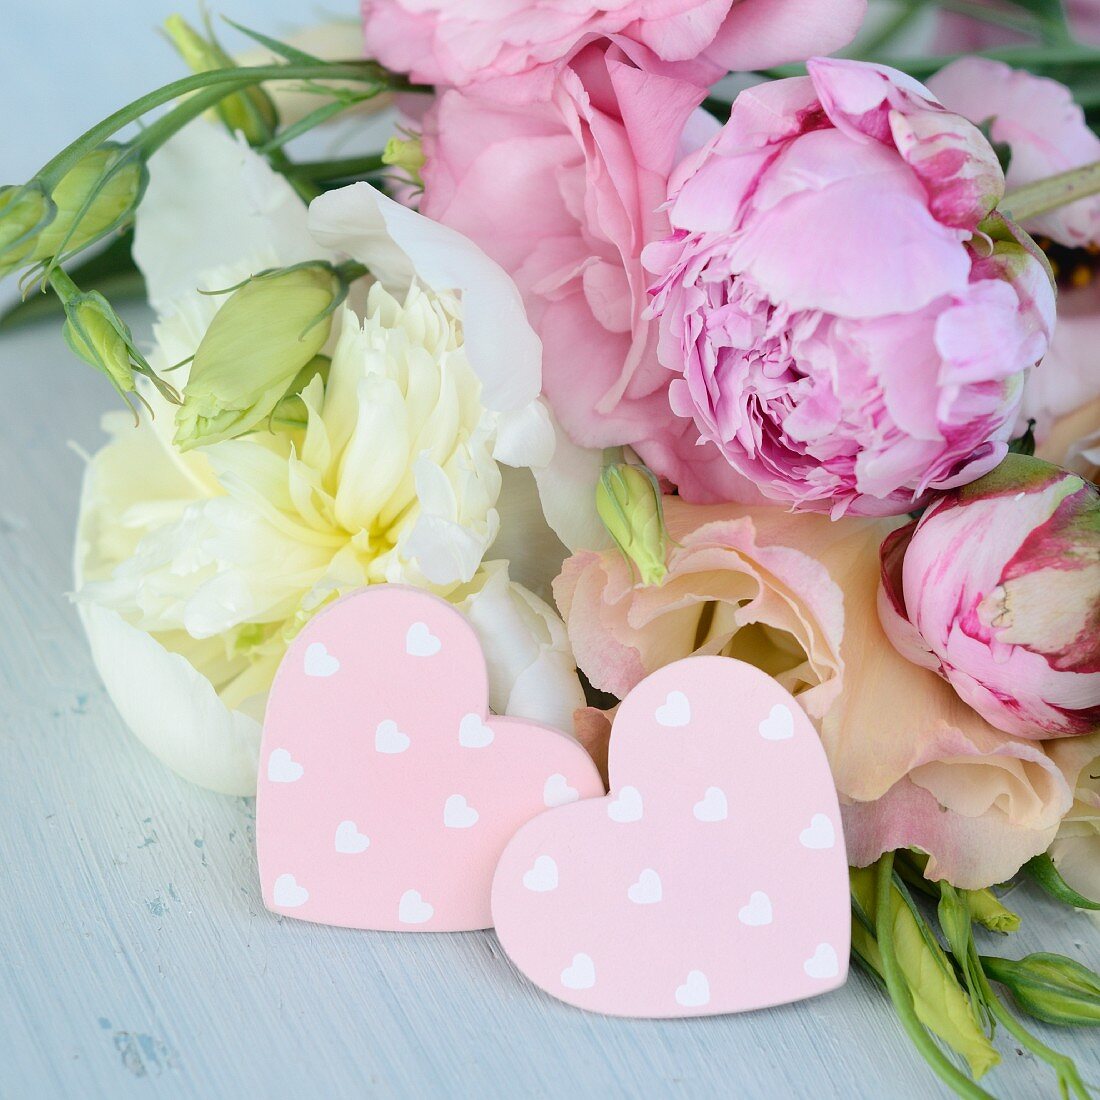 Two pink decorative hearts in front of bouquet (peonies)